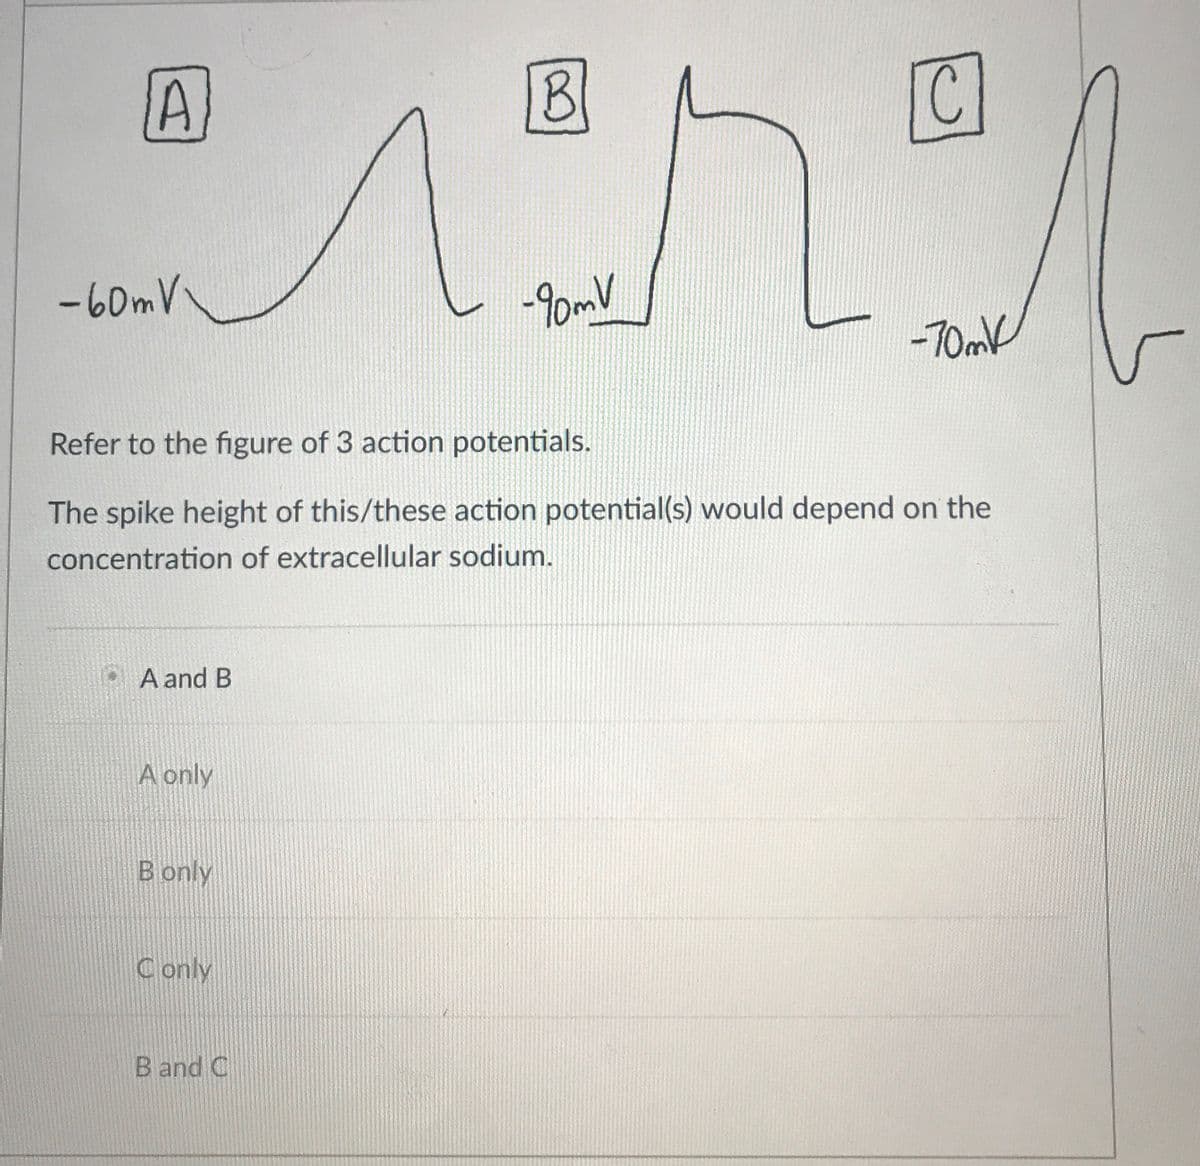 -60mV
-90mV
-70mk
Refer to the figure of 3 action potentials.
The spike height of this/these action potential(s) would depend on the
concentration of extracellular sodium.
A and B
A only
B only
C only
B and C
